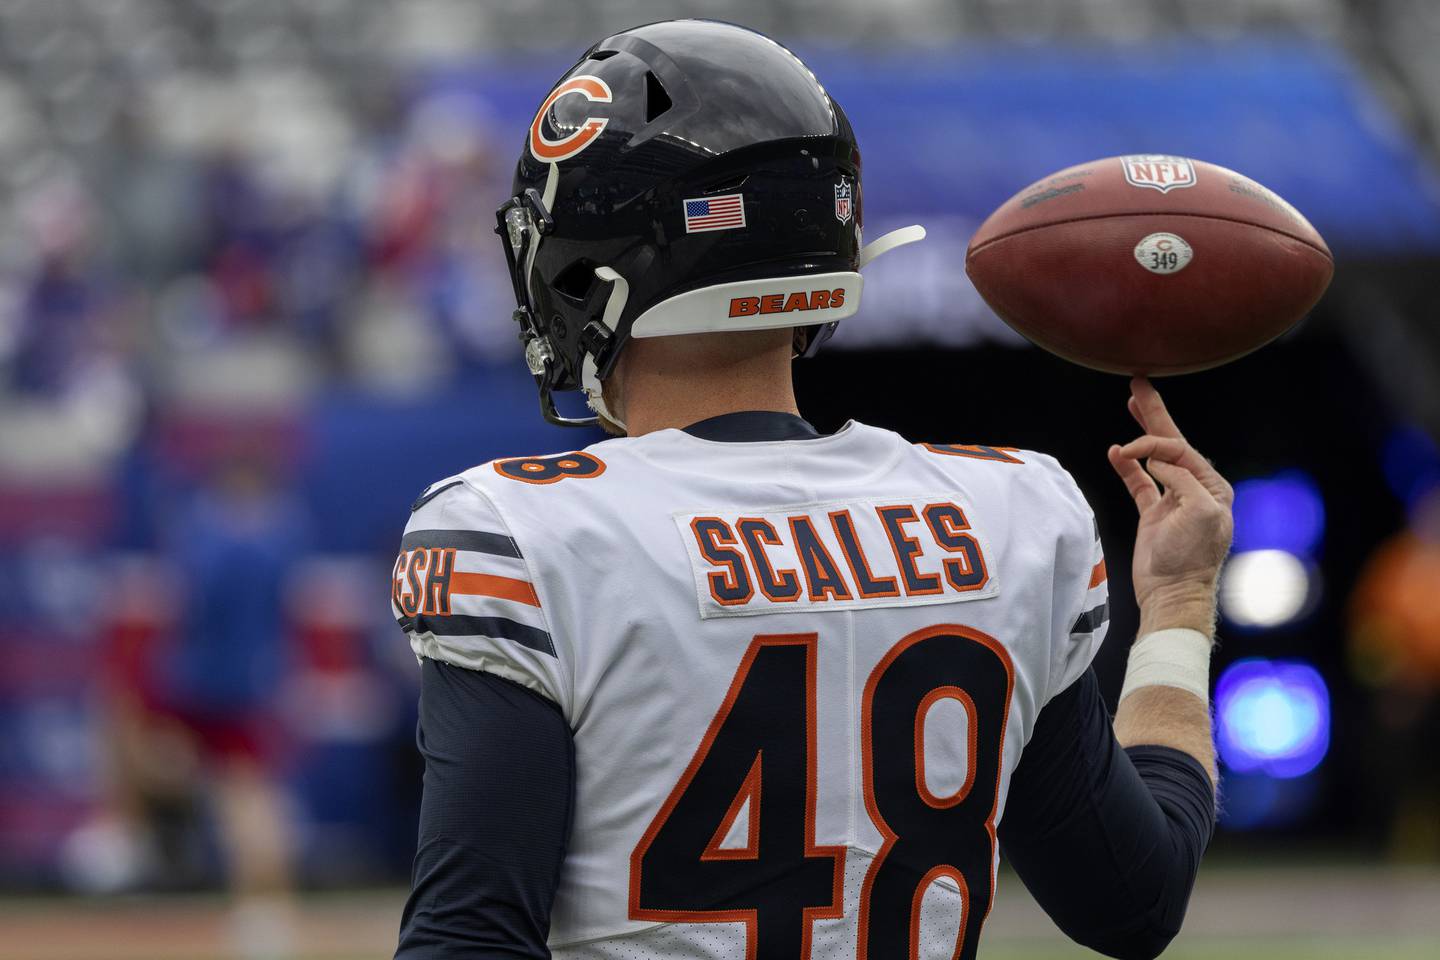 Bears long snapper Patrick Scales warms up before the game against the Giants on Oct. 12, 2022.